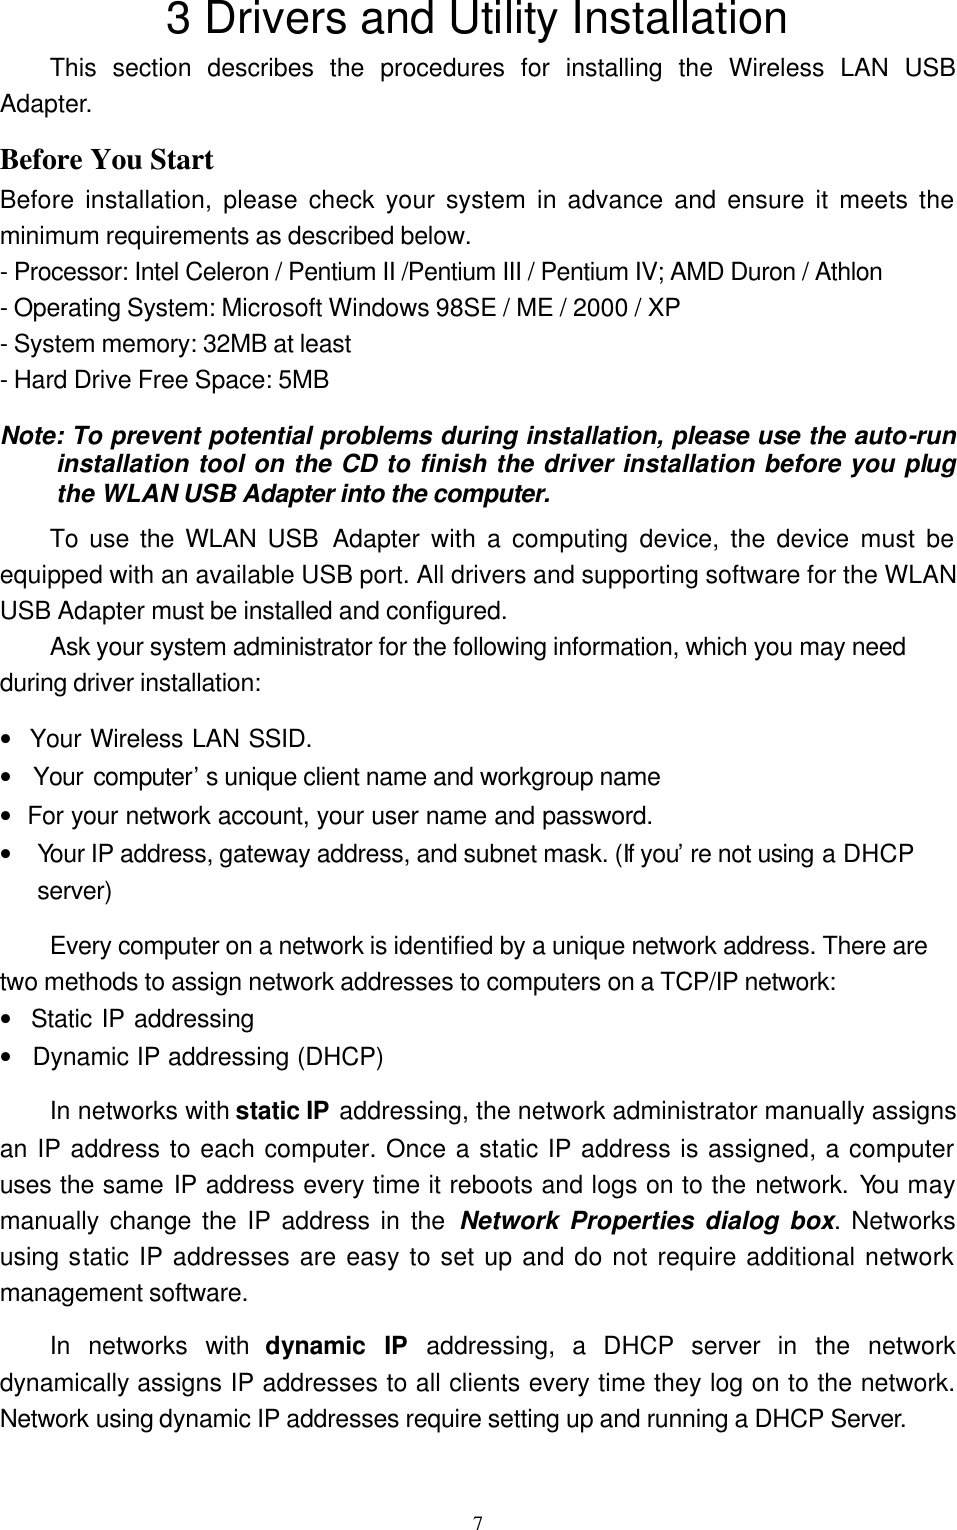  73 Drivers and Utility Installation This section describes the procedures for installing the Wireless LAN USB Adapter.   Before You Start Before installation, please check your system in advance and ensure it meets the minimum requirements as described below. - Processor: Intel Celeron / Pentium II /Pentium III / Pentium IV; AMD Duron / Athlon - Operating System: Microsoft Windows 98SE / ME / 2000 / XP - System memory: 32MB at least - Hard Drive Free Space: 5MB Note: To prevent potential problems during installation, please use the auto-run installation tool on the CD to finish the driver installation before you plug the WLAN USB Adapter into the computer. To use the WLAN USB Adapter with a computing device, the device must be equipped with an available USB port. All drivers and supporting software for the WLAN USB Adapter must be installed and configured. Ask your system administrator for the following information, which you may need during driver installation: •  Your Wireless LAN SSID. •  Your computer’s unique client name and workgroup name •  For your network account, your user name and password. •  Your IP address, gateway address, and subnet mask. (If you’re not using a DHCP server) Every computer on a network is identified by a unique network address. There are two methods to assign network addresses to computers on a TCP/IP network: •  Static IP addressing •  Dynamic IP addressing (DHCP) In networks with static IP addressing, the network administrator manually assigns an IP address to each computer. Once a static IP address is assigned, a computer uses the same IP address every time it reboots and logs on to the network. You may manually change the IP address in the Network Properties dialog box. Networks using static IP addresses are easy to set up and do not require additional network management software. In networks with dynamic IP addressing, a DHCP server in the network dynamically assigns IP addresses to all clients every time they log on to the network. Network using dynamic IP addresses require setting up and running a DHCP Server.  